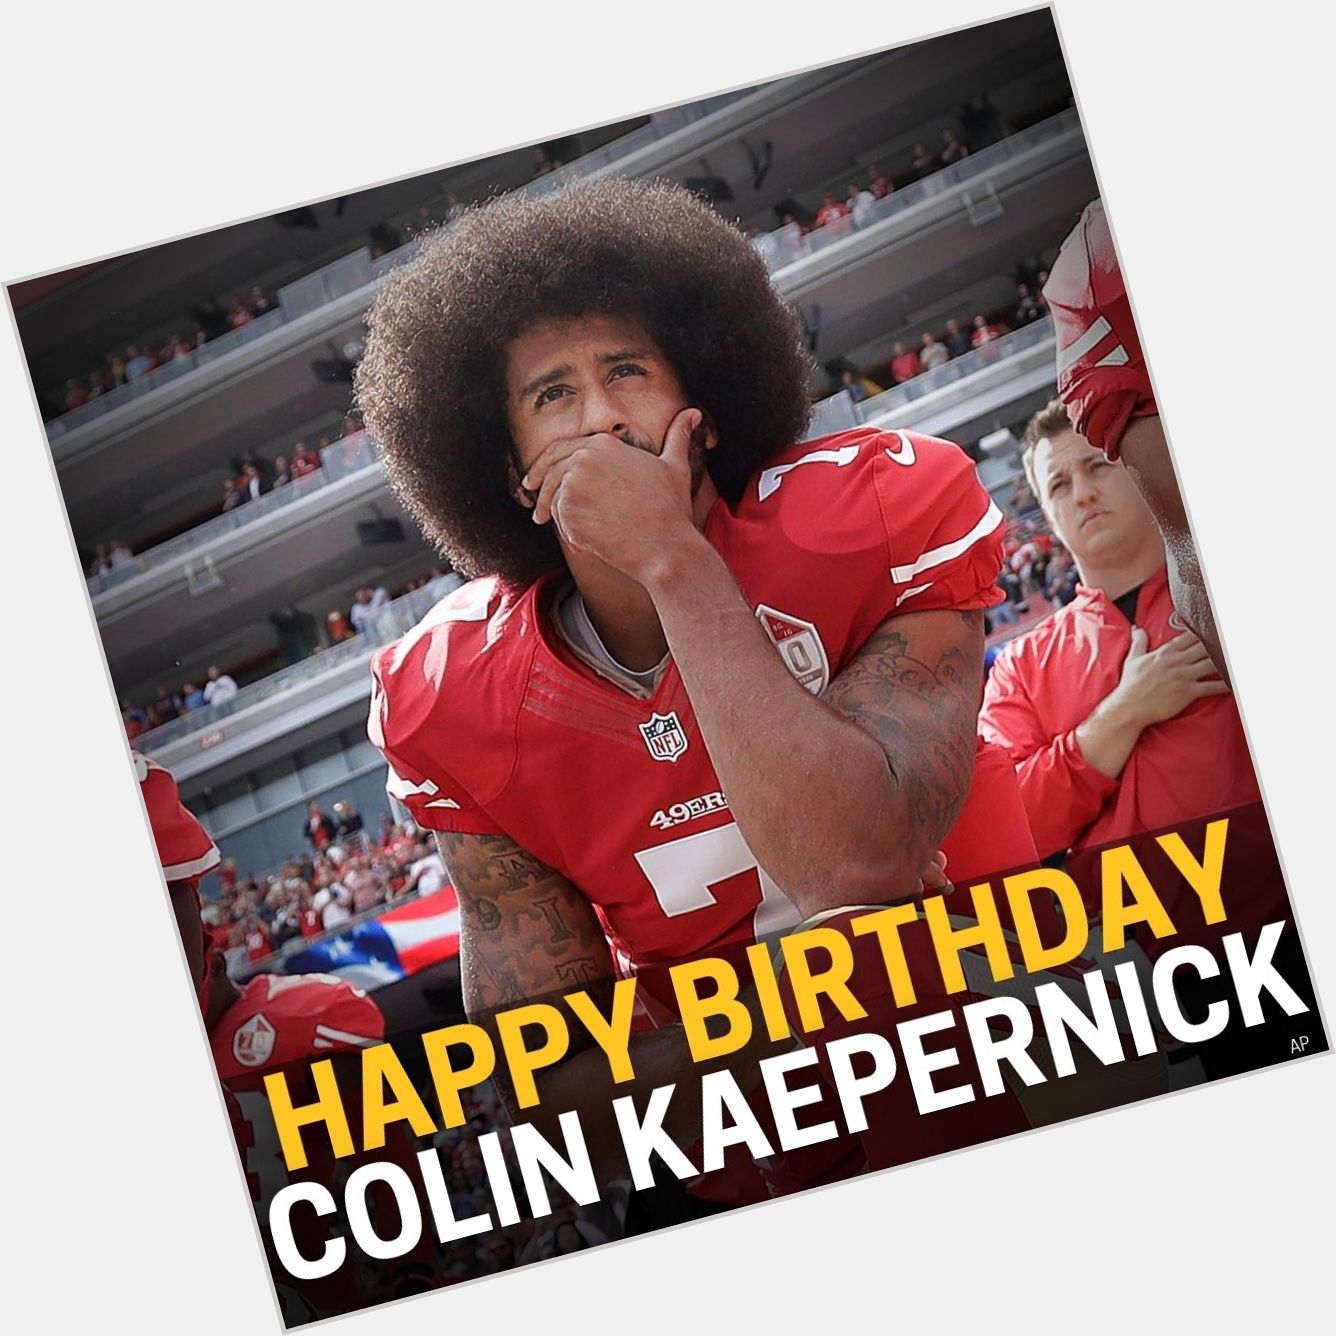 Happy Birthday to Colin Kaepernick! What\s your message to Kaepernick on his special day?  